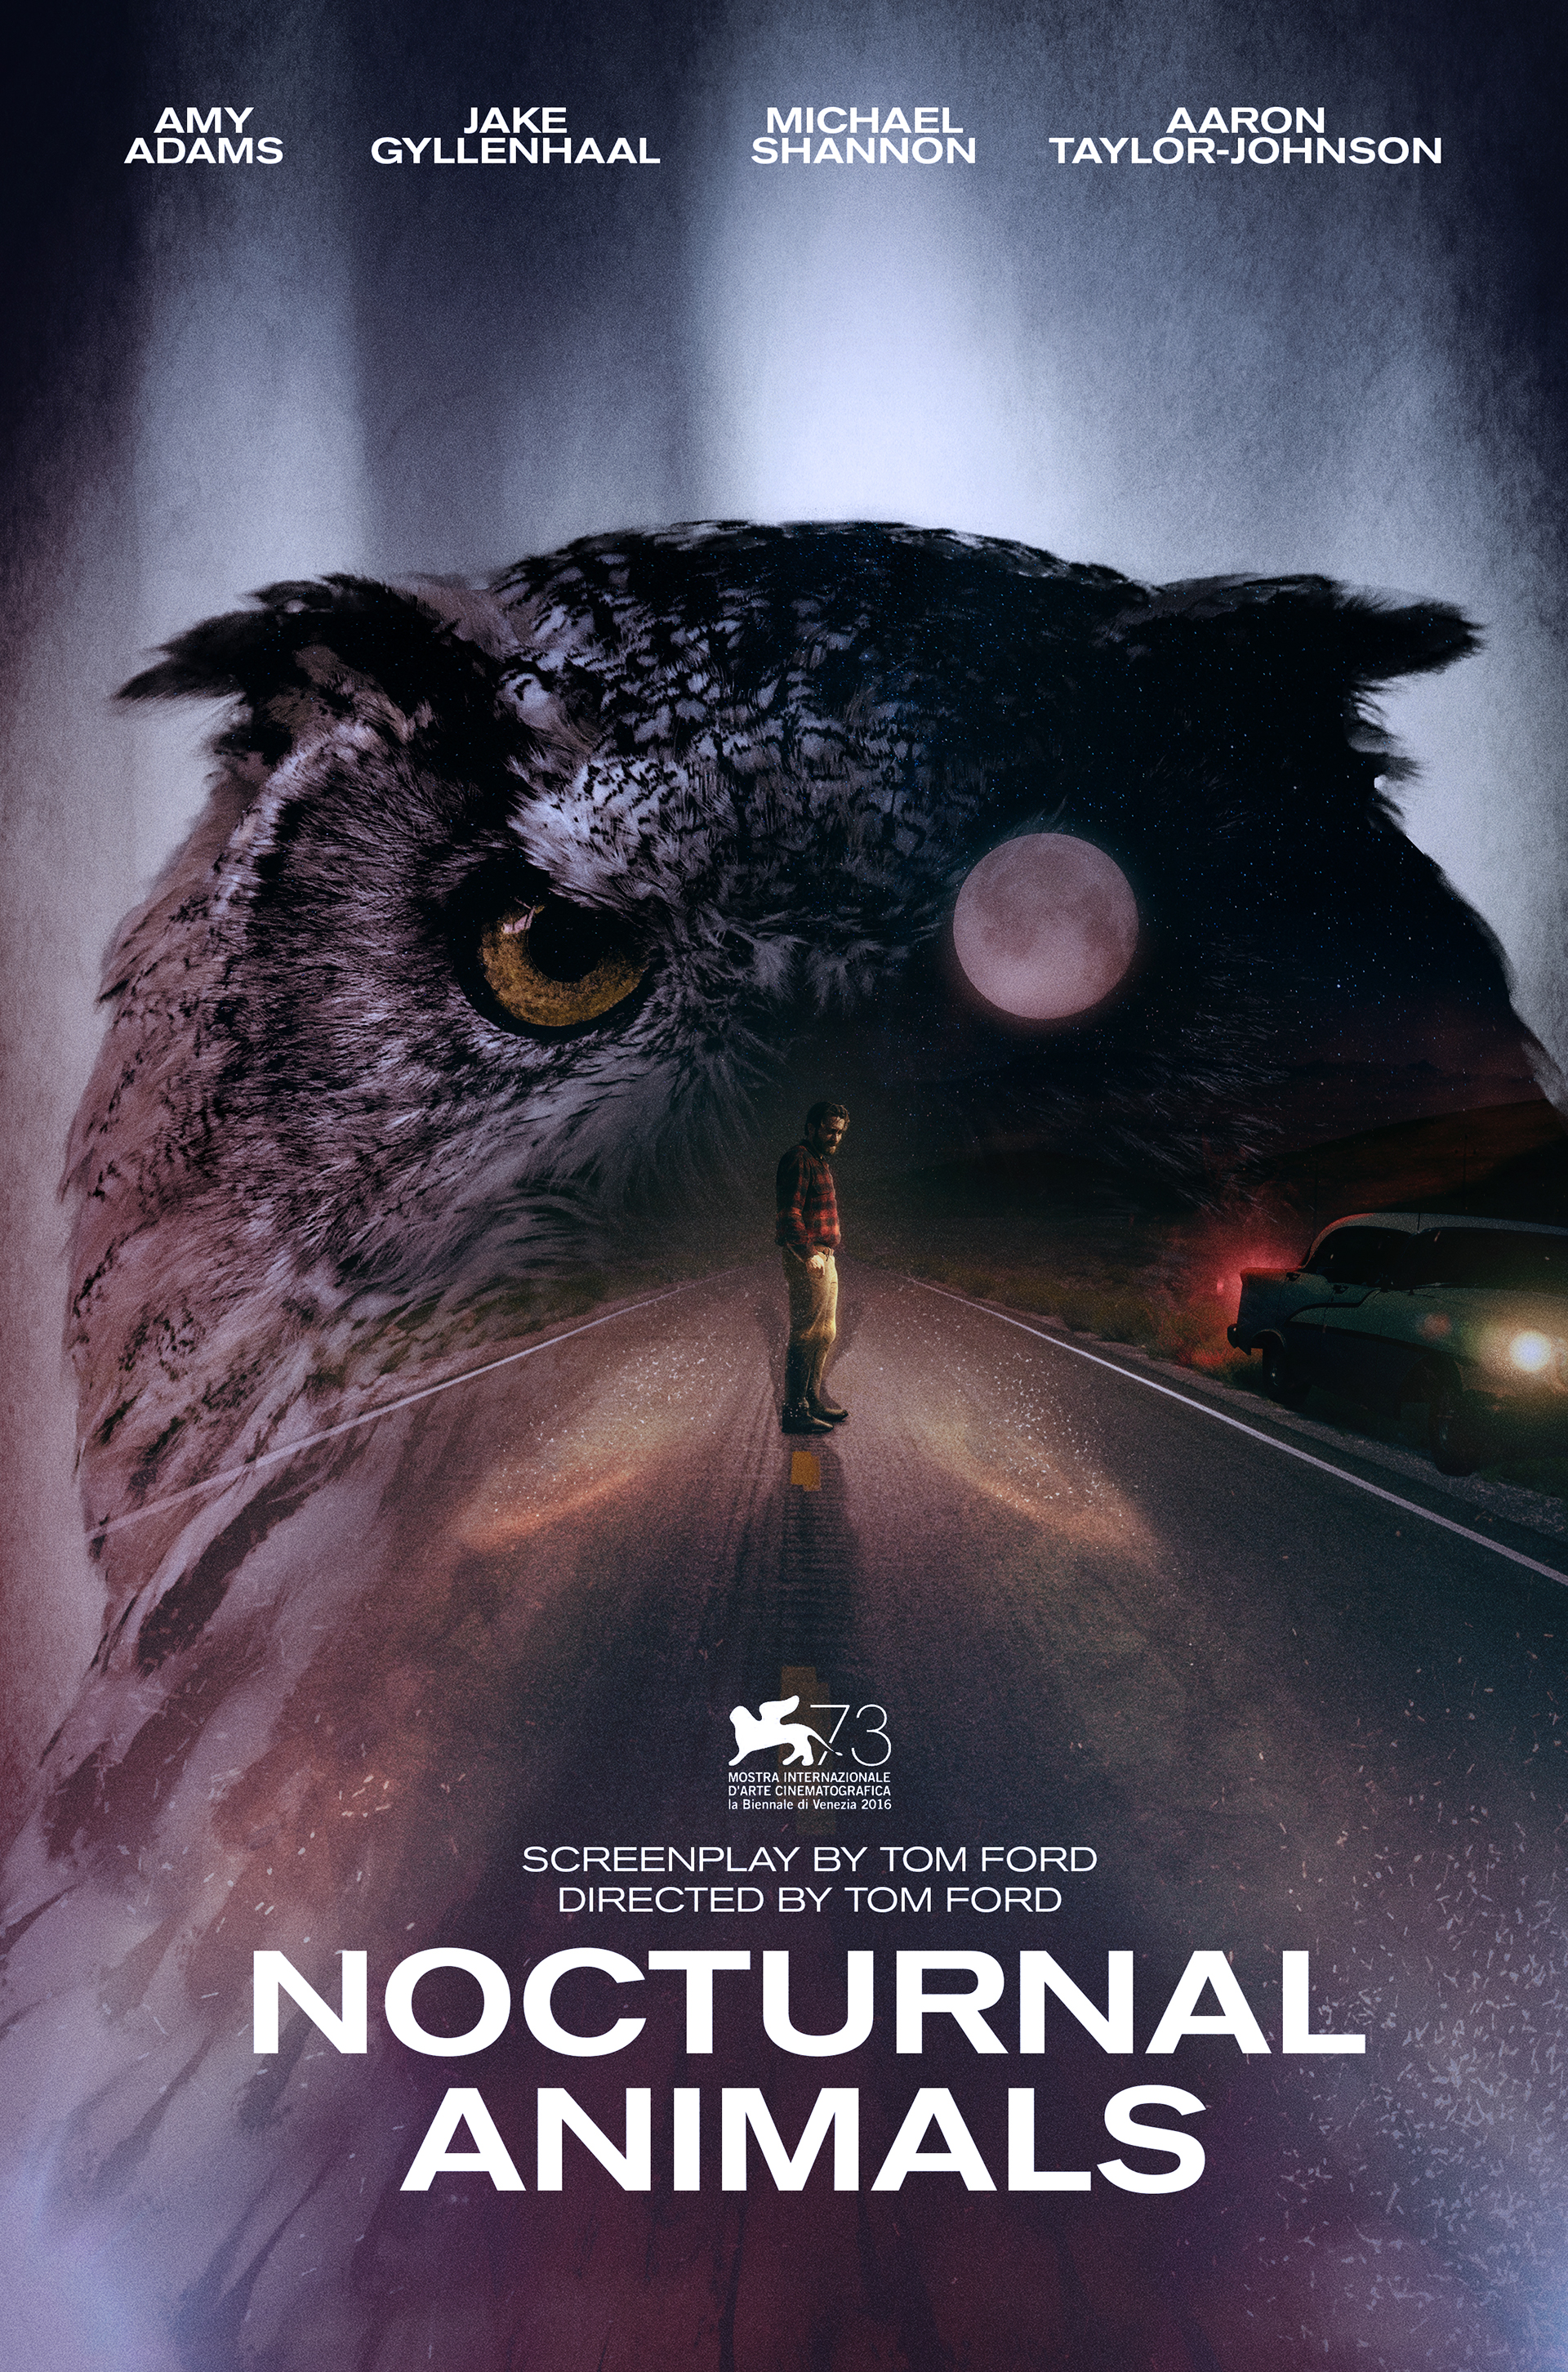 NOCTURNAL ANIMALS POSTER (SELF-INITIATED) on Behance